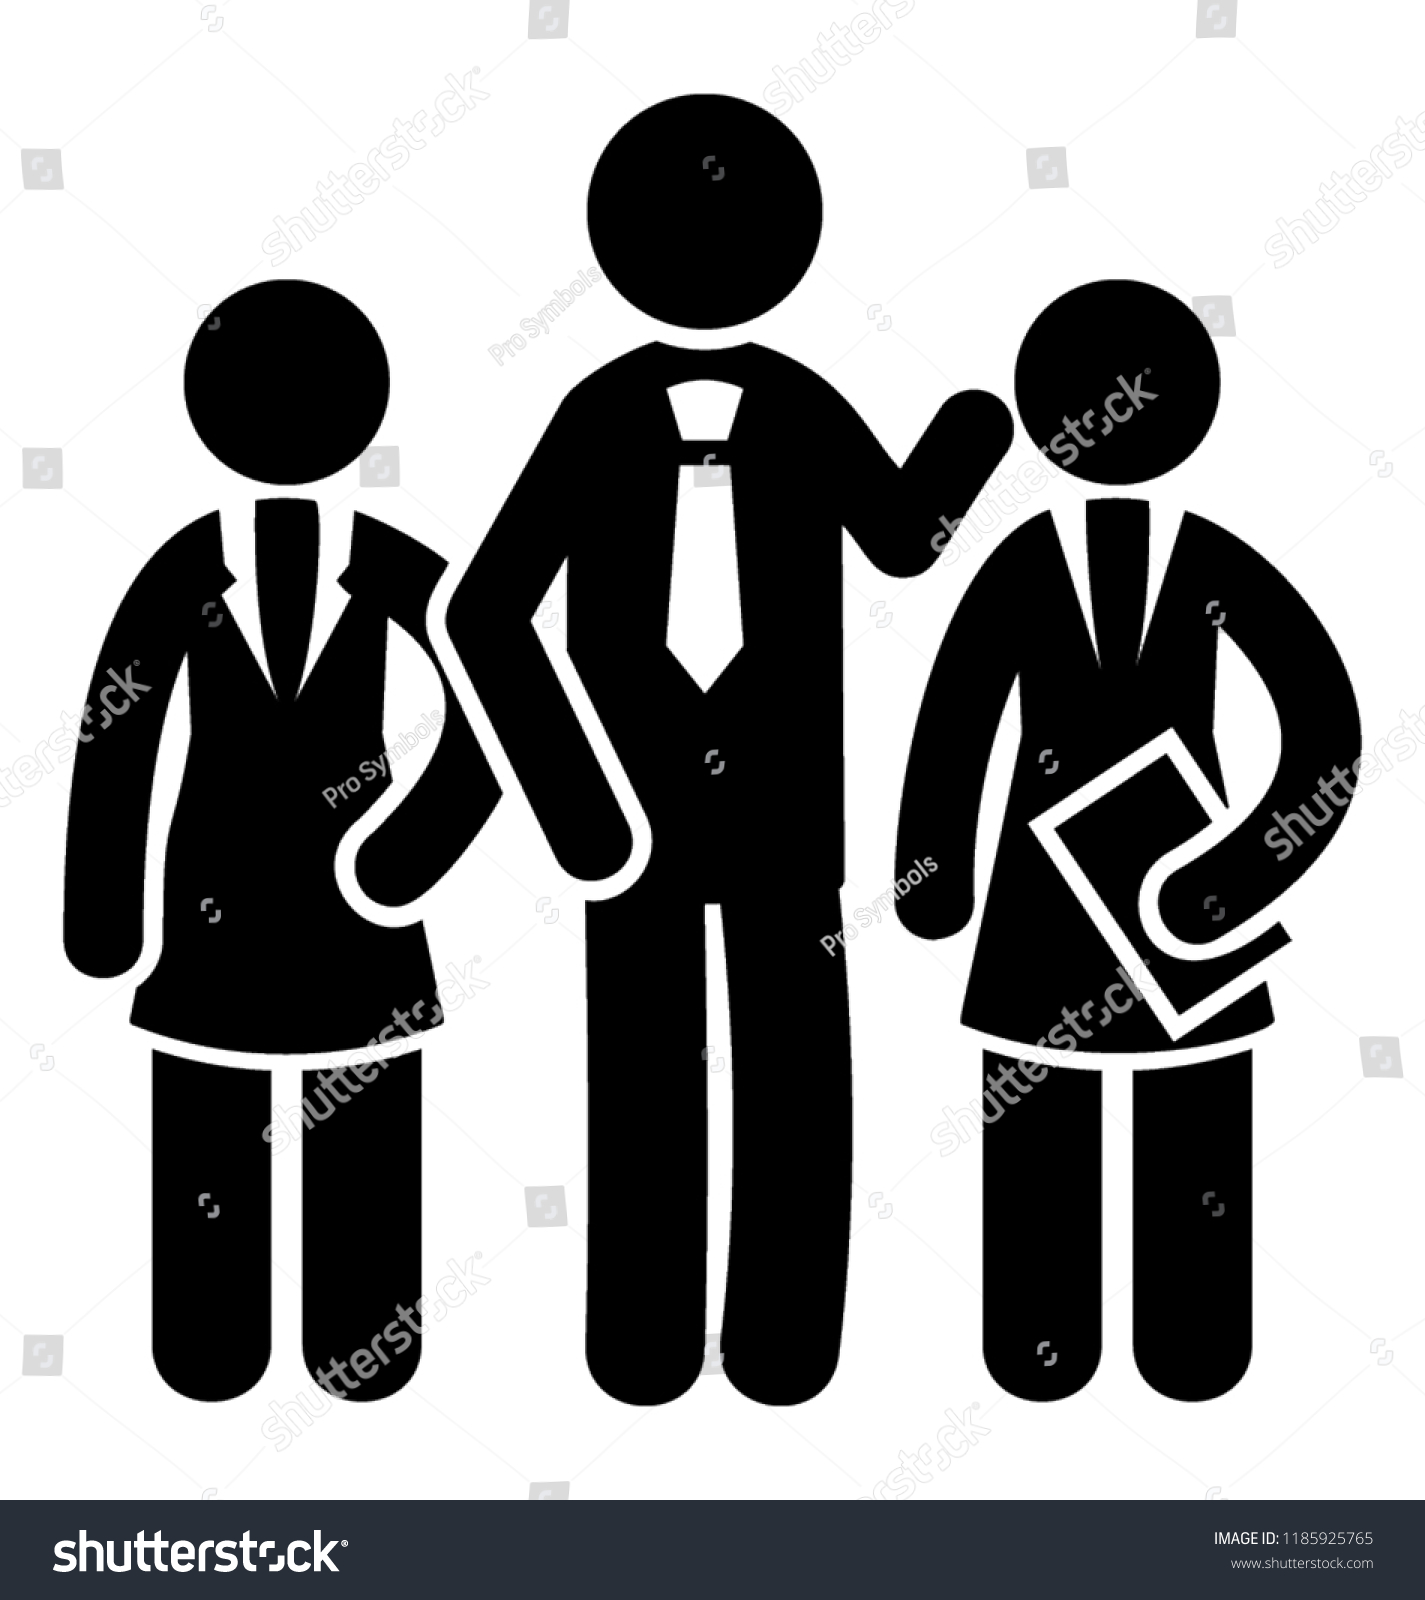 Team building illustration of staff member in a formal appearance #1185925765